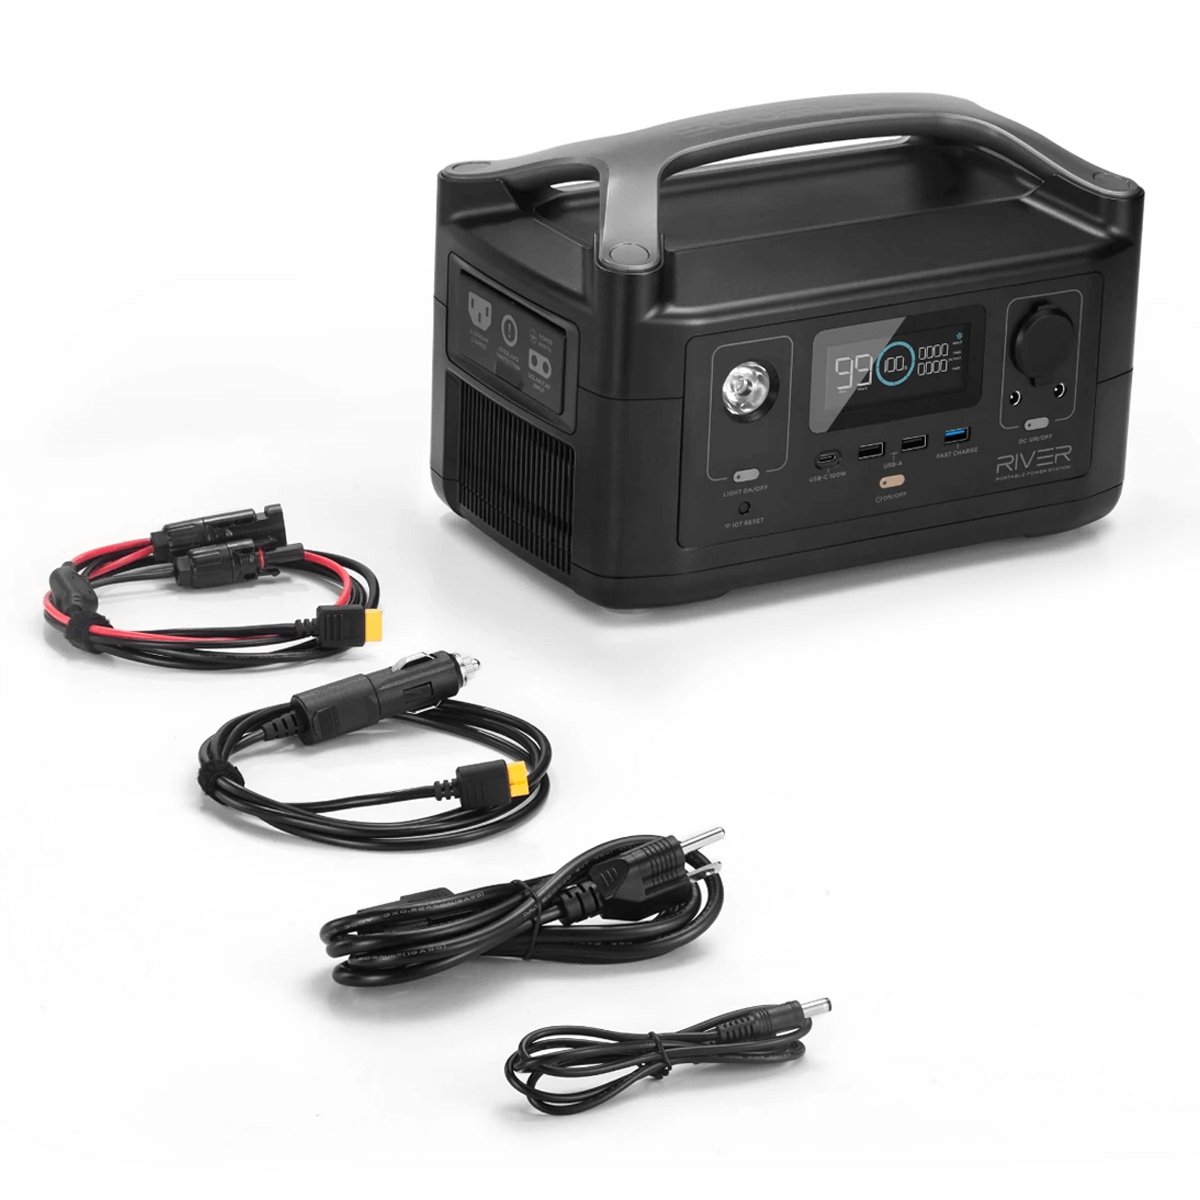 The EcoFlow RIVER - 288Wh Portable Power Station features an LCD screen and a convenient handle, and comes with various charging cables and connectors.